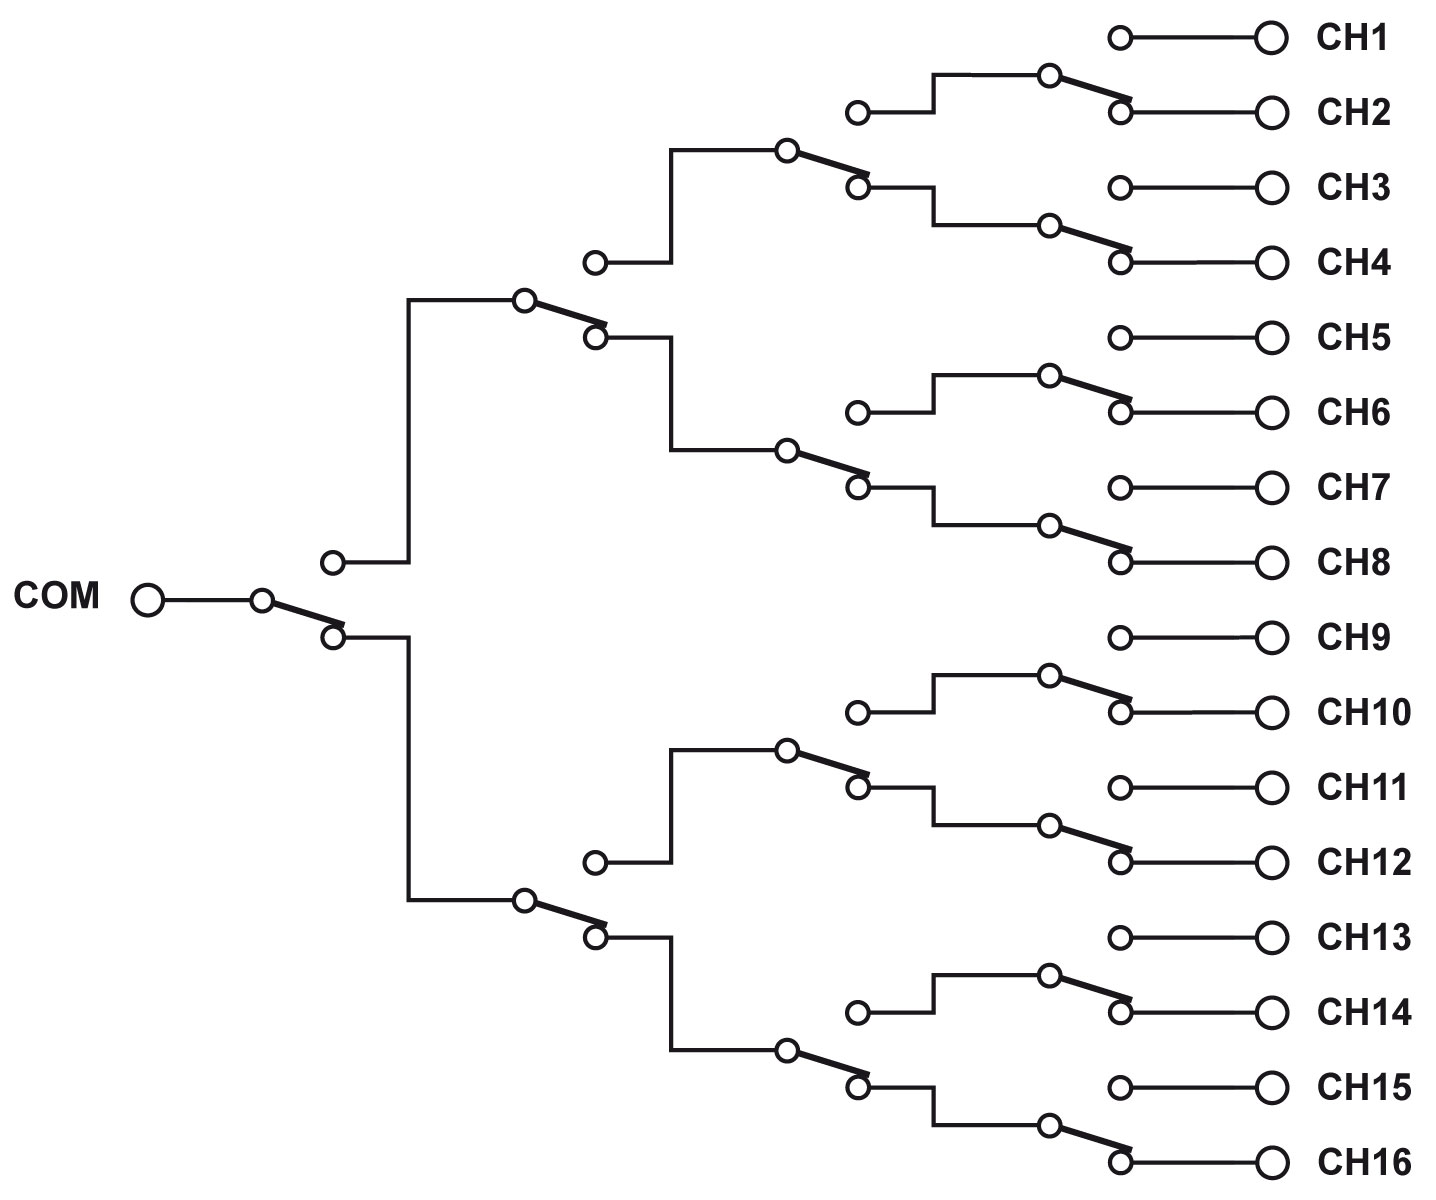 Diagram of a typical tree MUX with SPDT relays